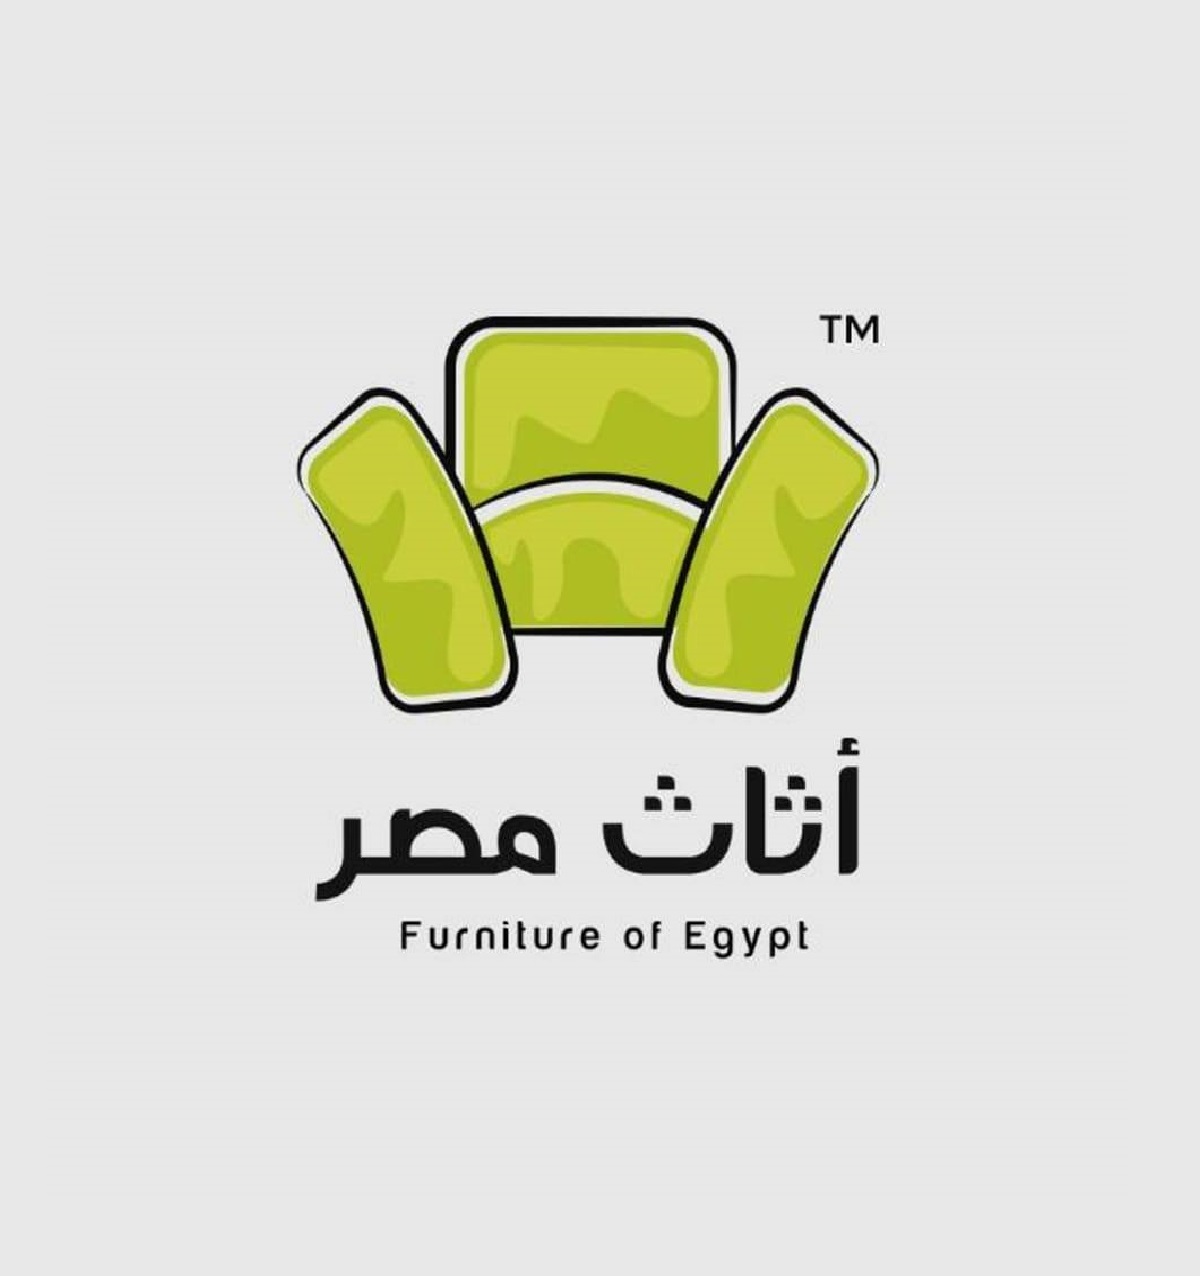 Furniture of Egypt